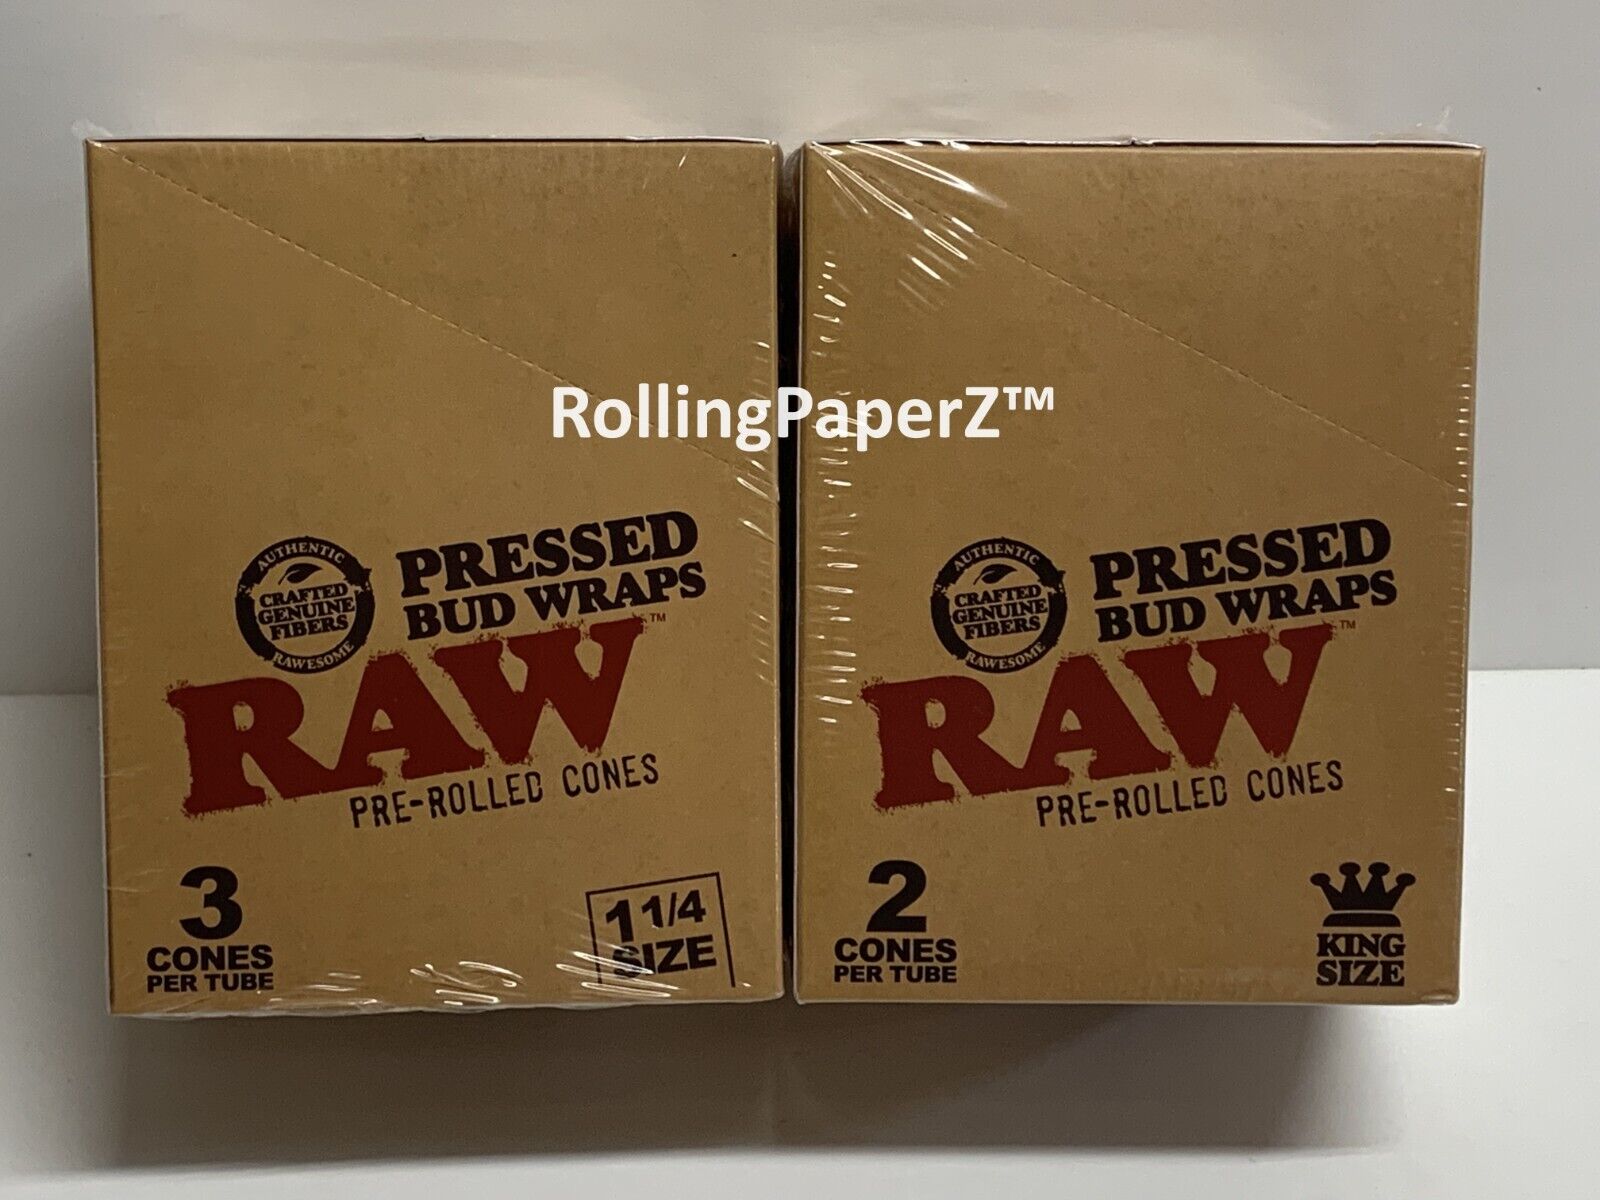 RAW PRESSED BUD PRE-ROLLED CONES -YOU GET BOTH Displays 1 1/4 and King Size READ